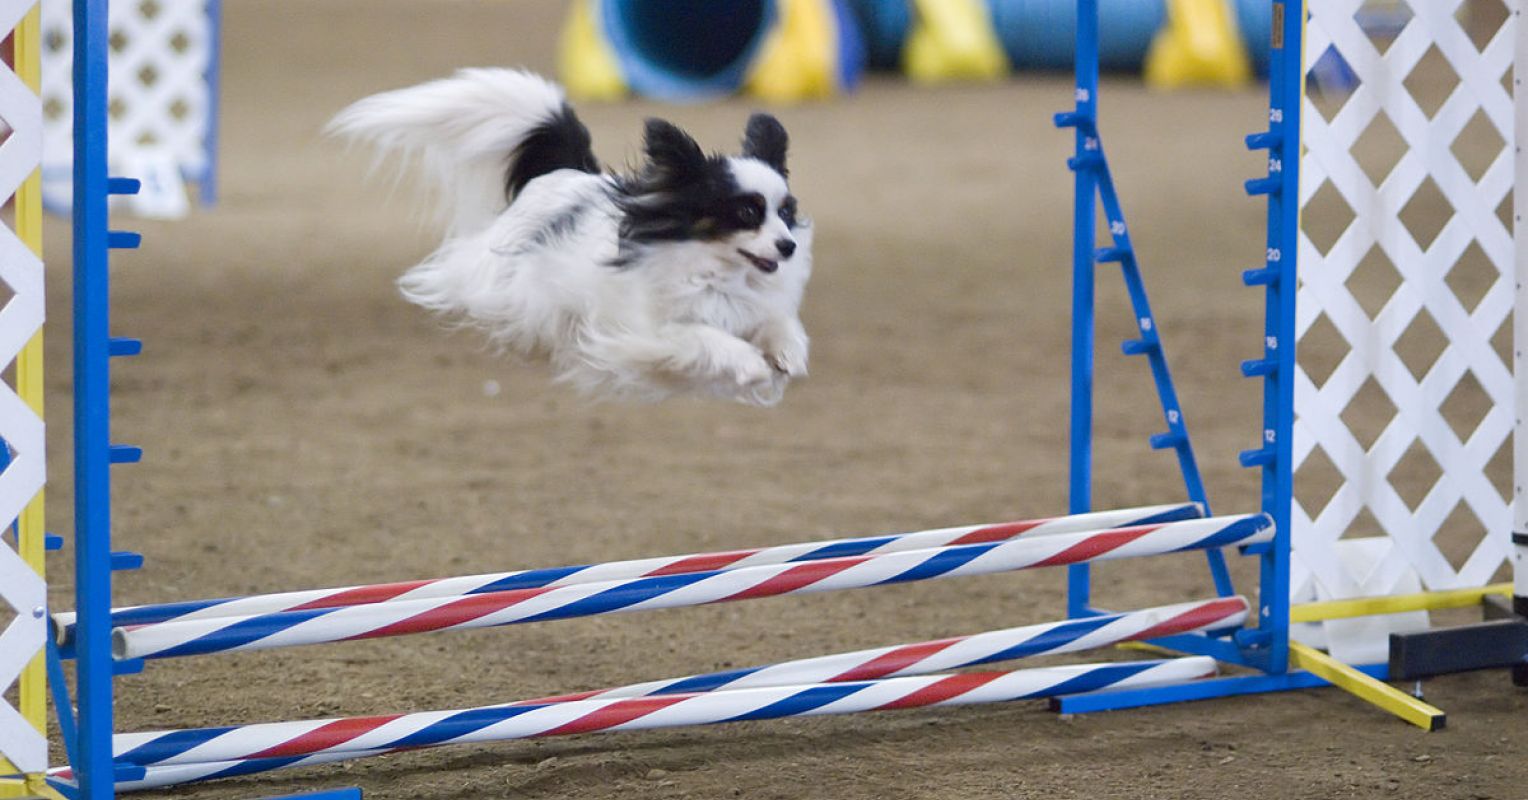 https://cdn2.psychologytoday.com/assets/styles/manual_crop_1_91_1_1528x800/public/field_blog_entry_teaser_image/Papillon%20dog%20agility%20jump%20by%20Ron%20Armstrong%20Helena%20MT_0.jpg?itok=Ps6cPWtq